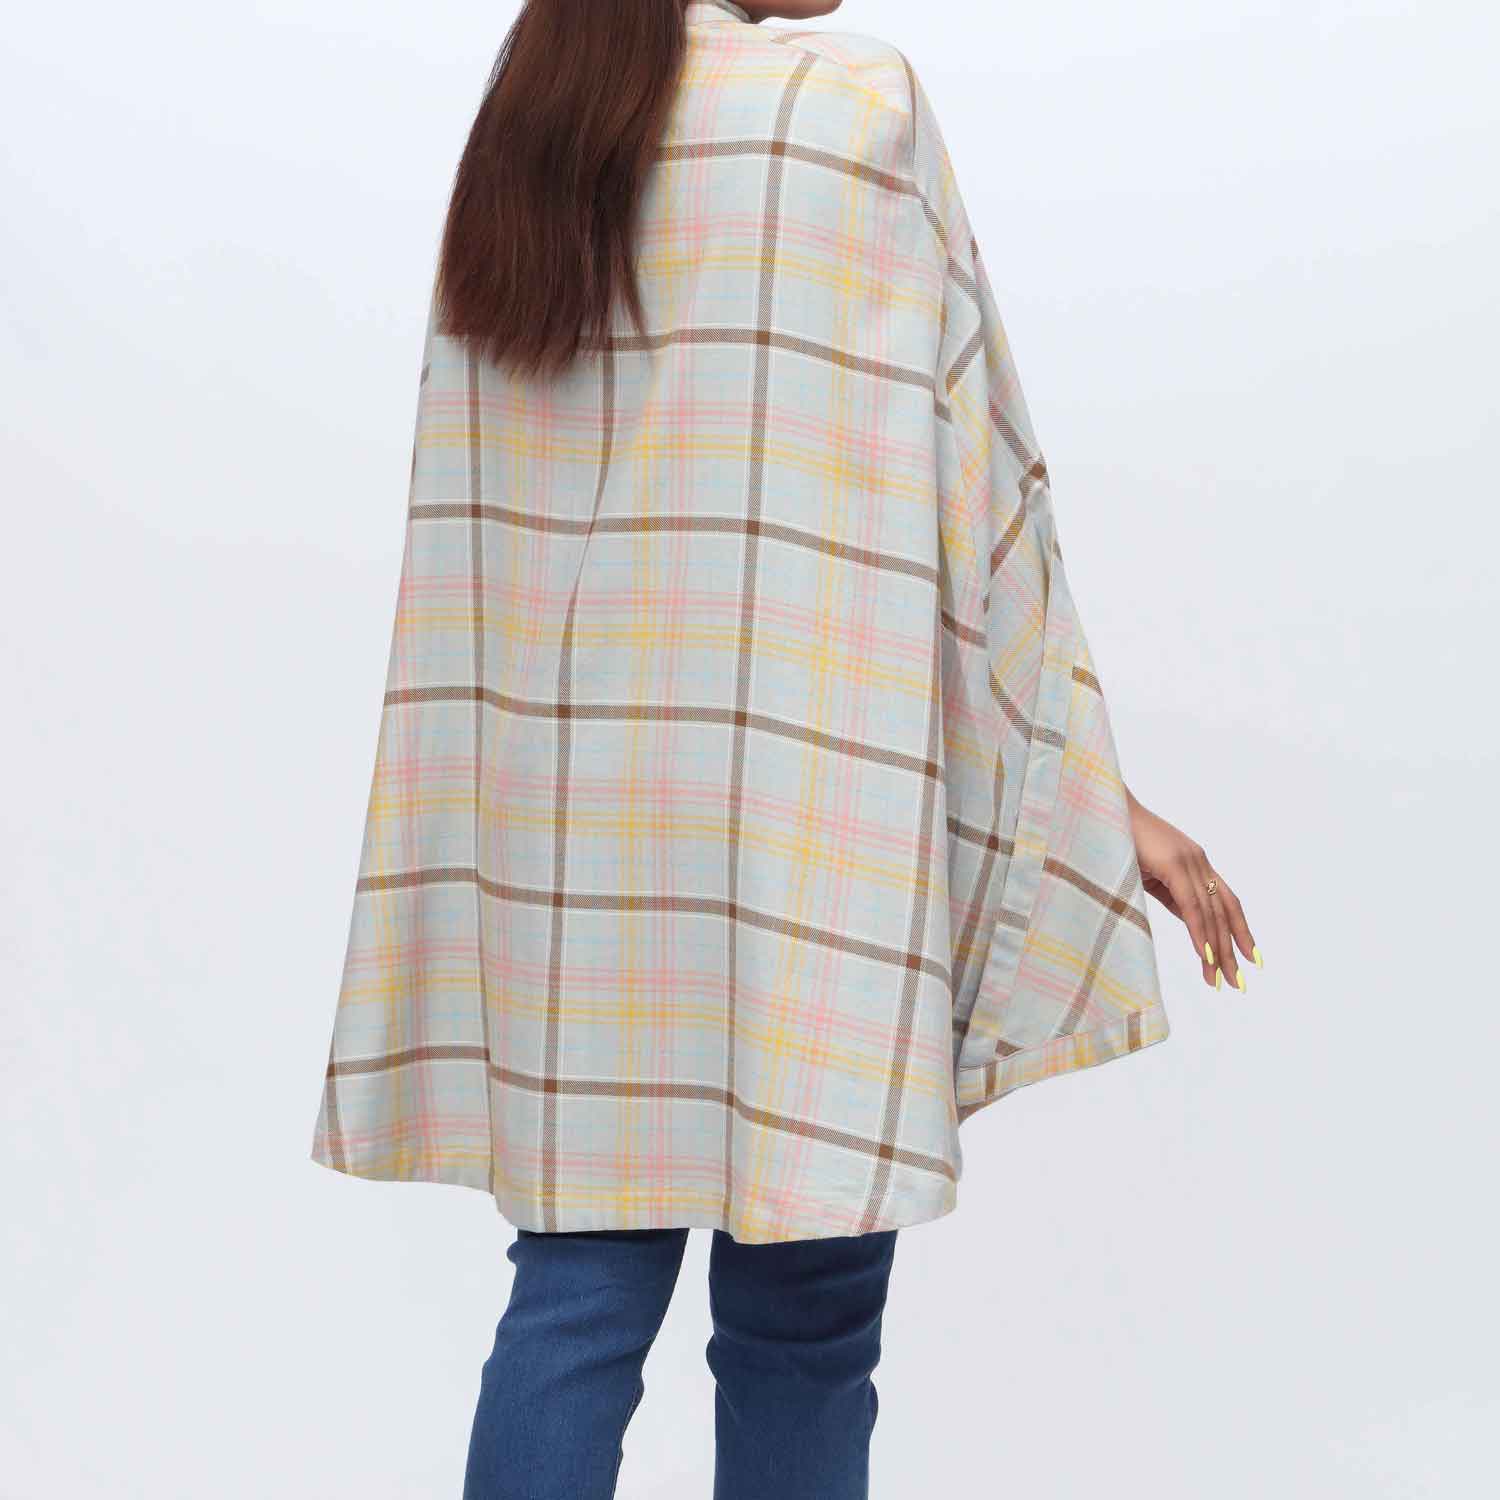 1PC- Flannel Checkered Top PW3289